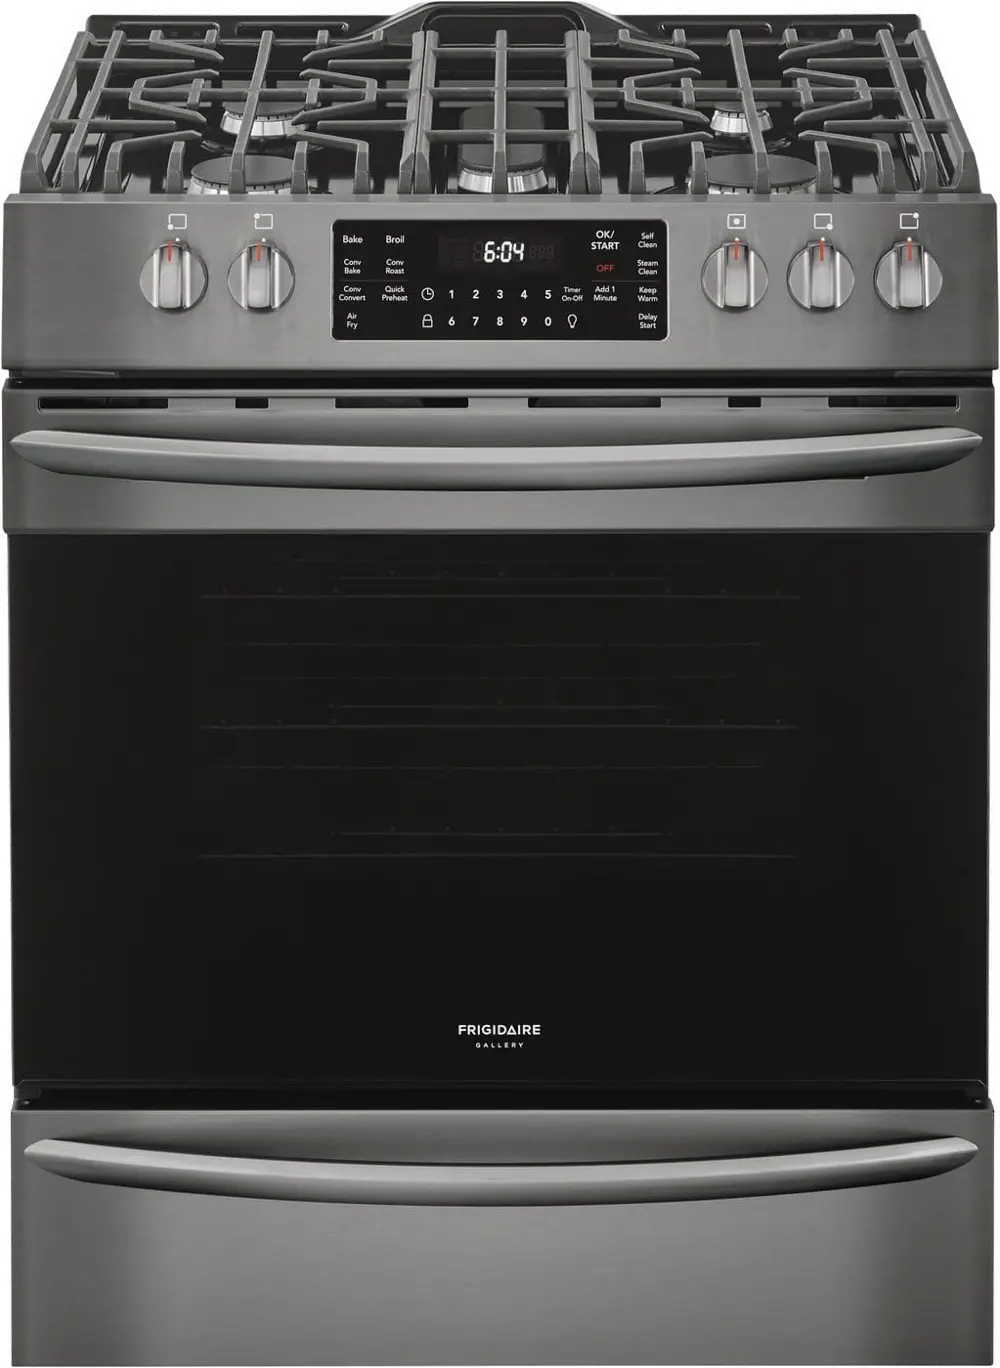 FGGH3047VD Frigidaire Gallery 5.6 cu. ft. Gas Slide-in Range with Convection Cooking - 30 Inch Black Stainless Steel-1